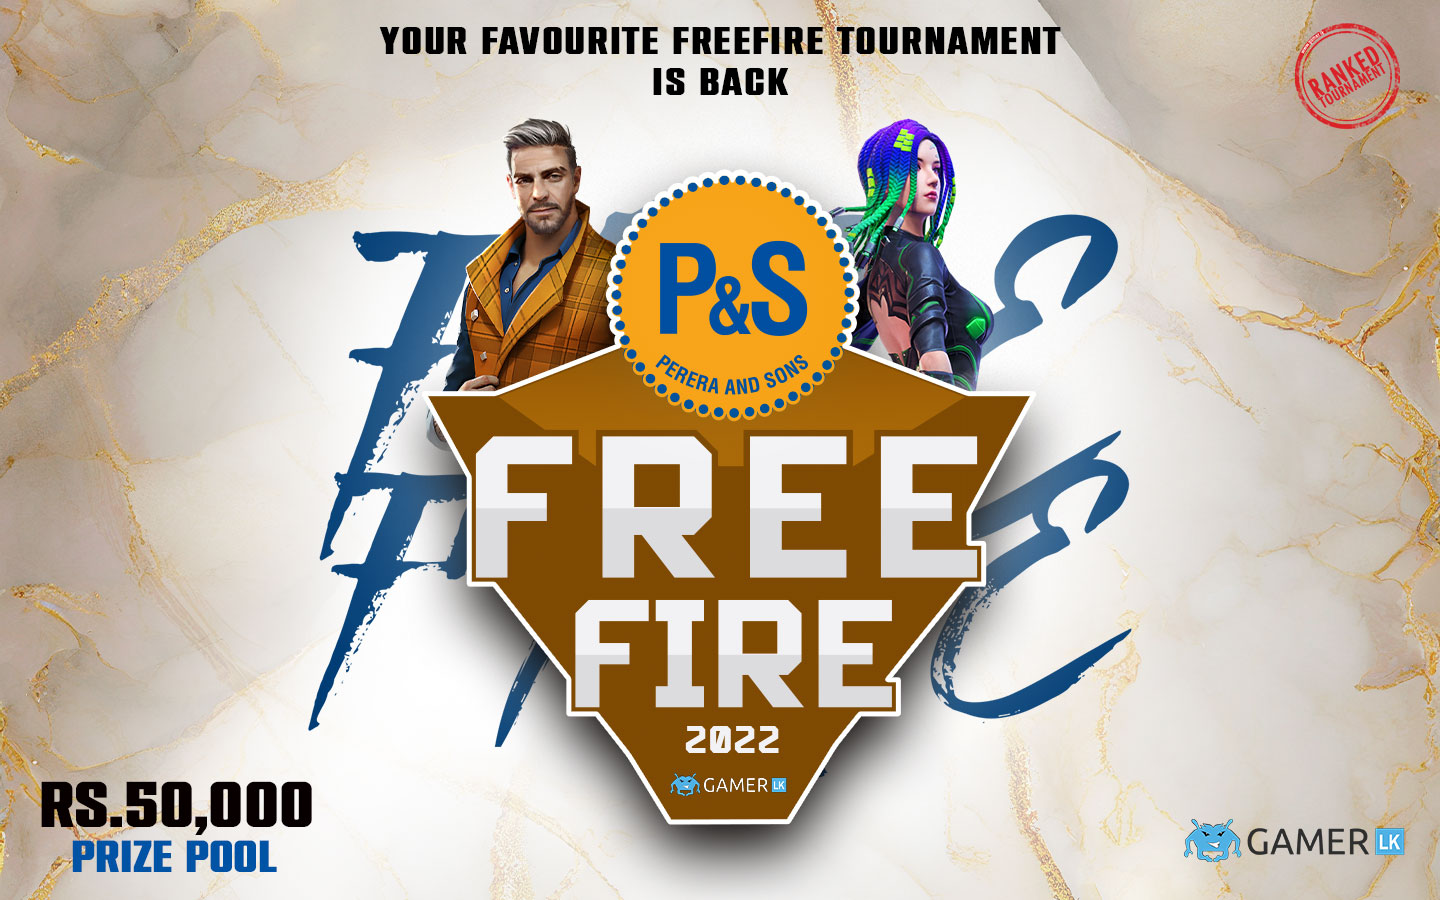 P&S Free Fire Contenders '22